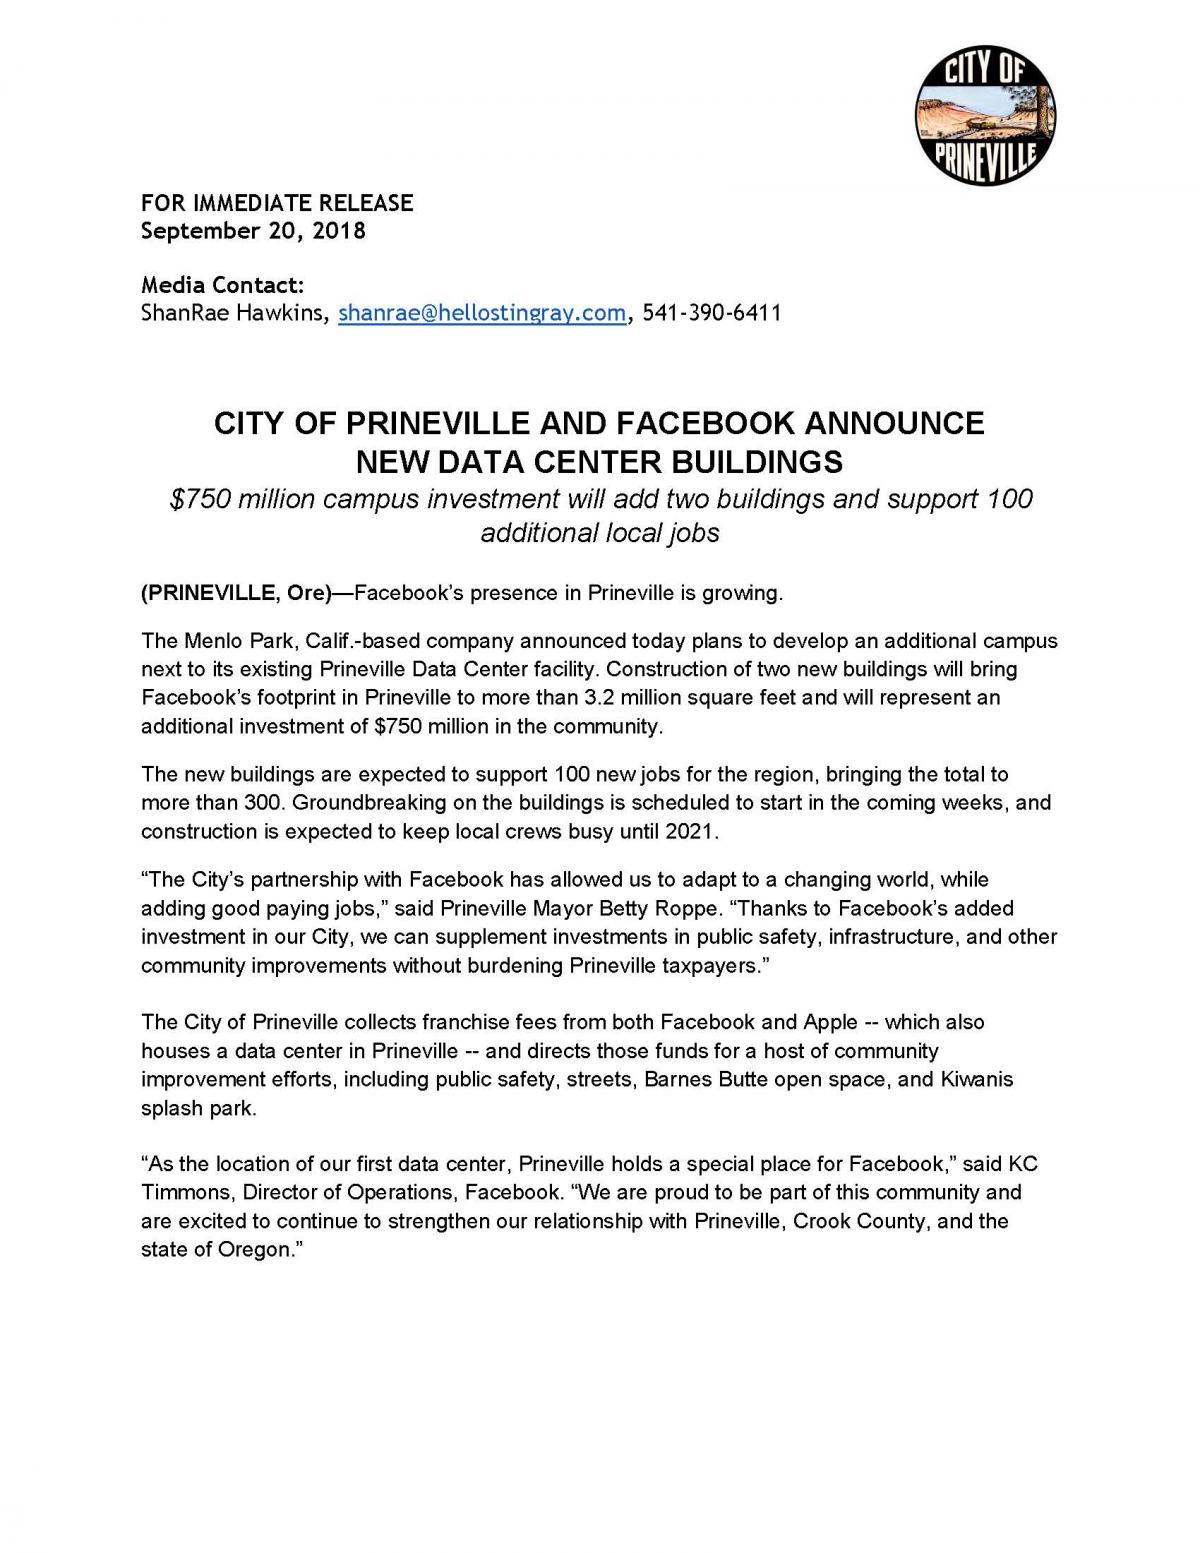 City of Prineville and Facebook Announce Additional Investment of $750 Million in Community